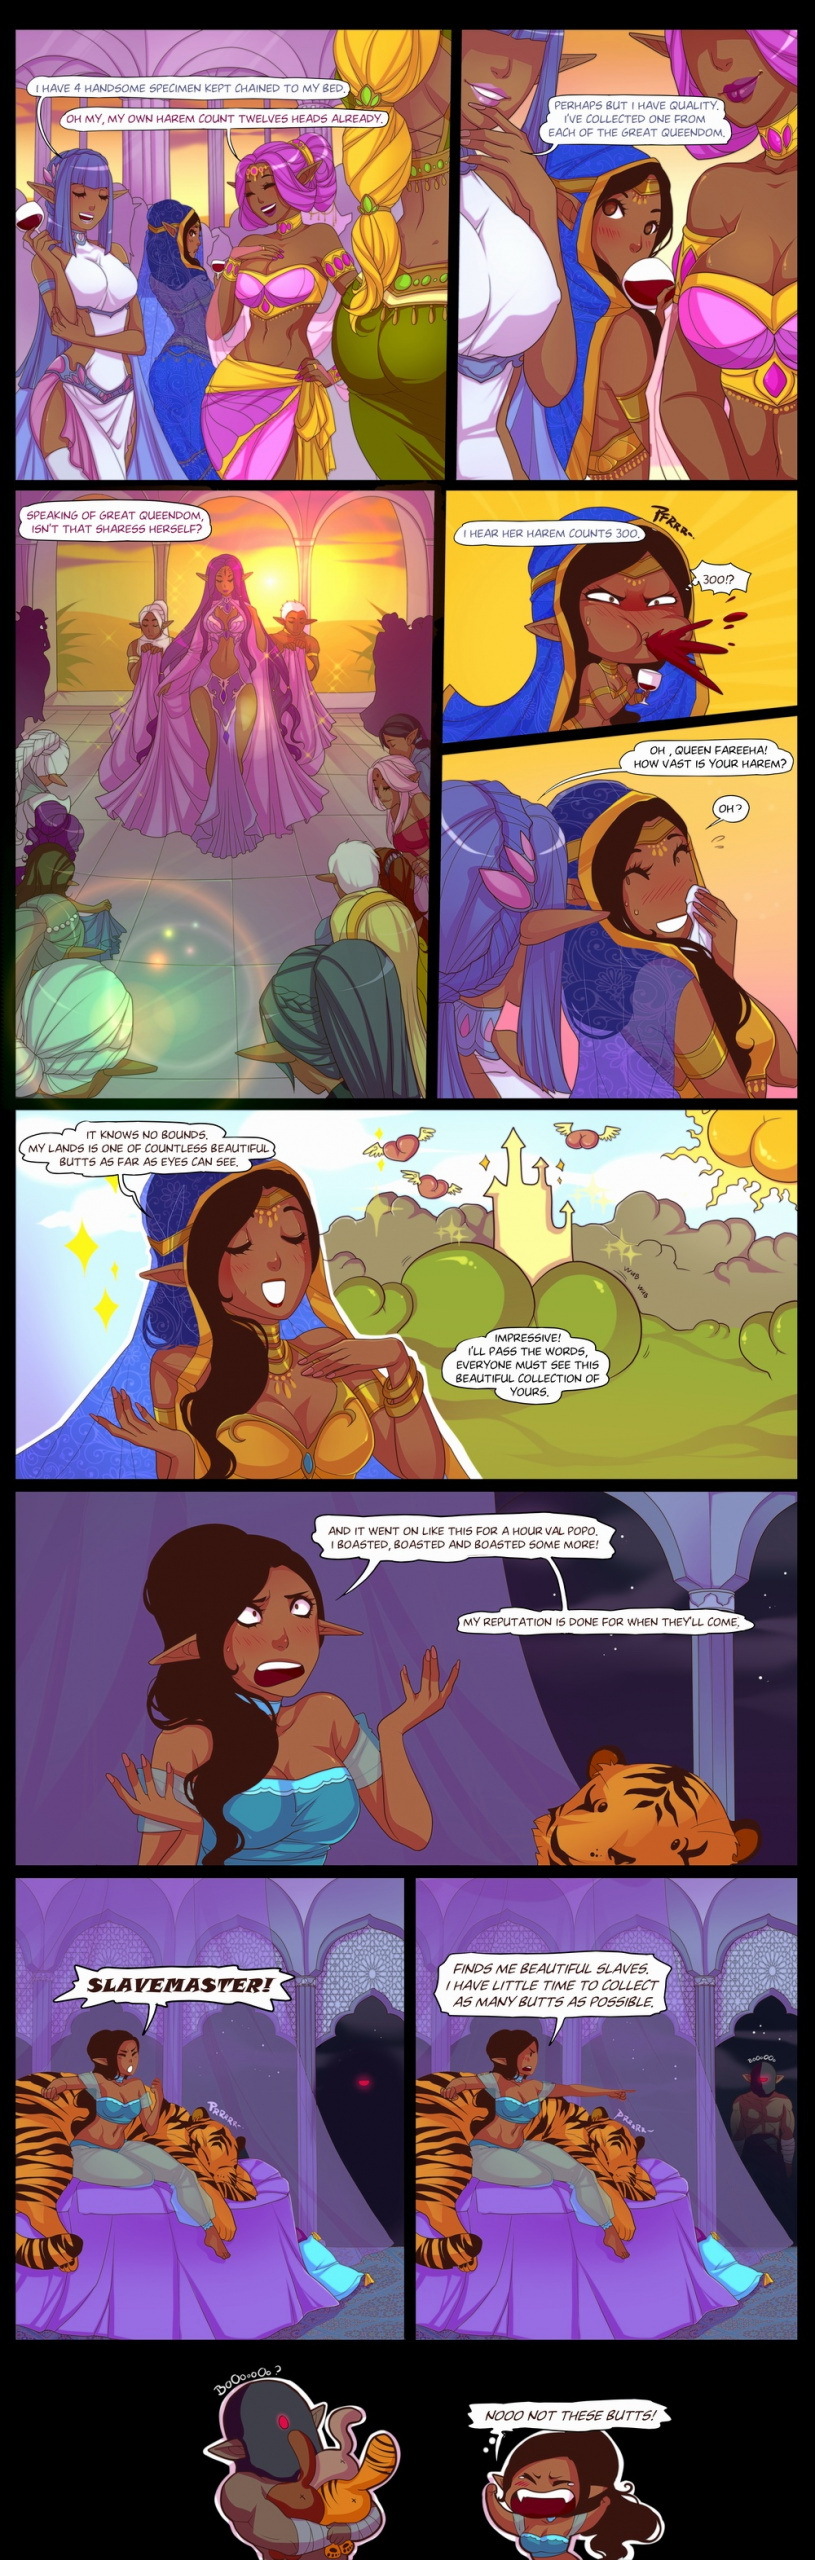 Queen of Butts - Page 1